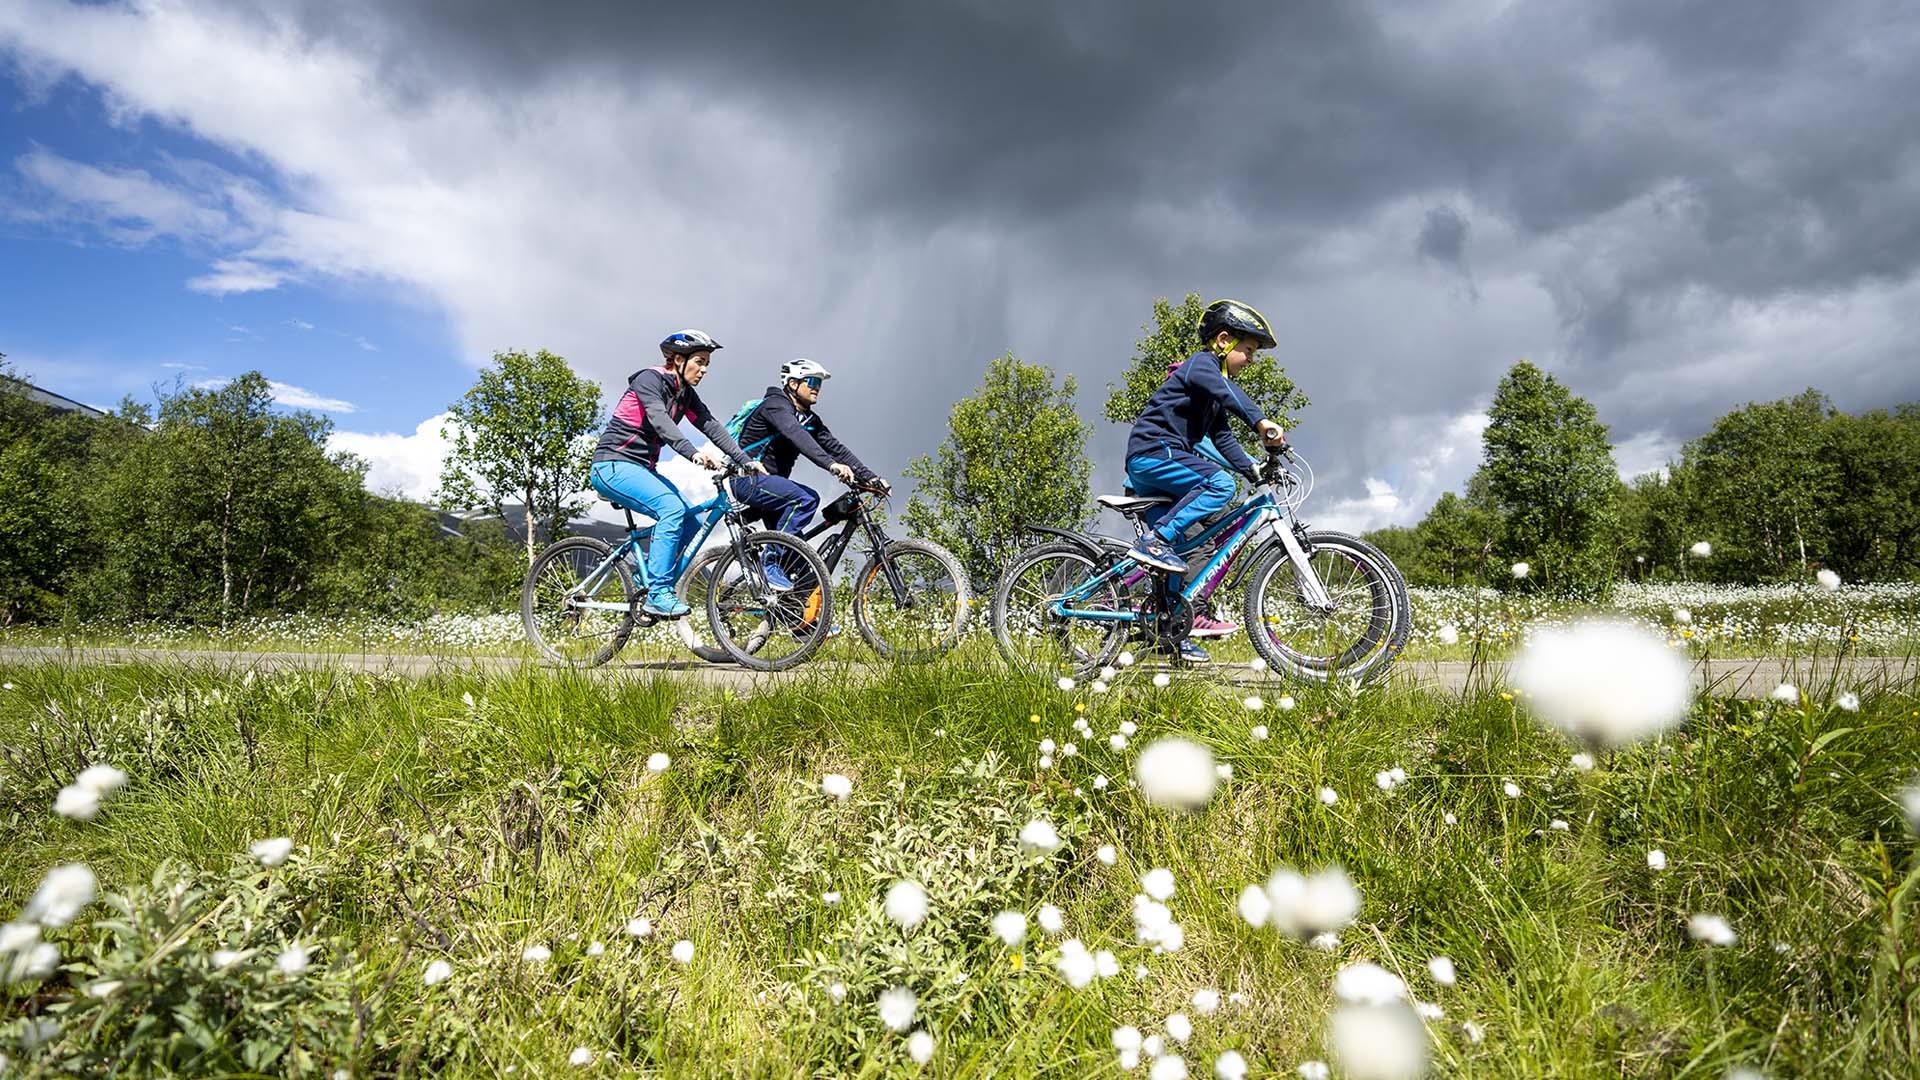 A family is cycling through a cotton grass meadow on a gravel road. In the background there are som birches, and the sky has dark clouds.